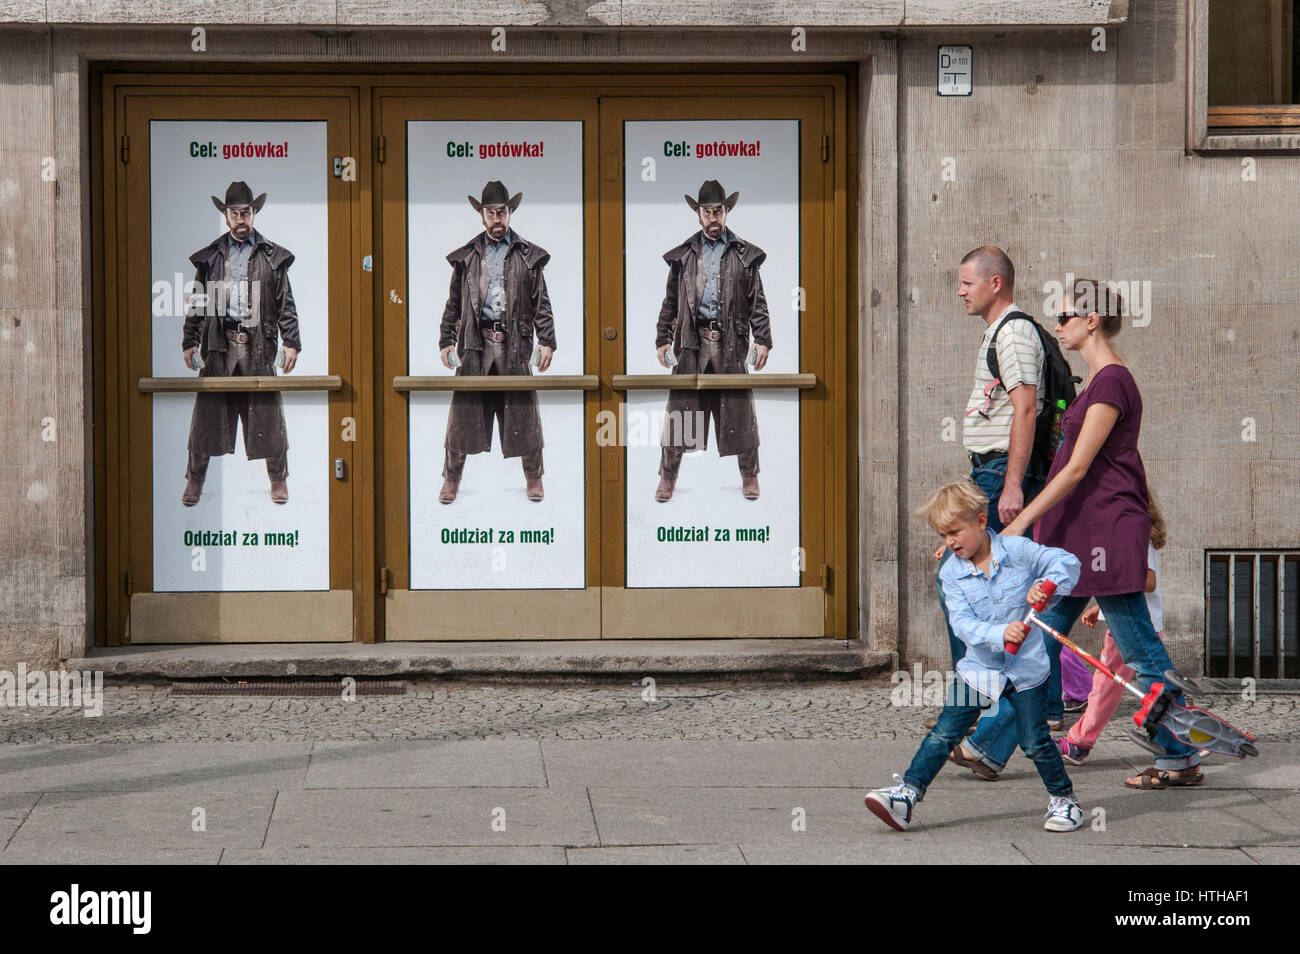 Strollers walking by 'Target: cash! Troops follow me!' Actor Chuck Norris in western attire, in bank advertising poster in Wroclaw, Poland Stock Photo